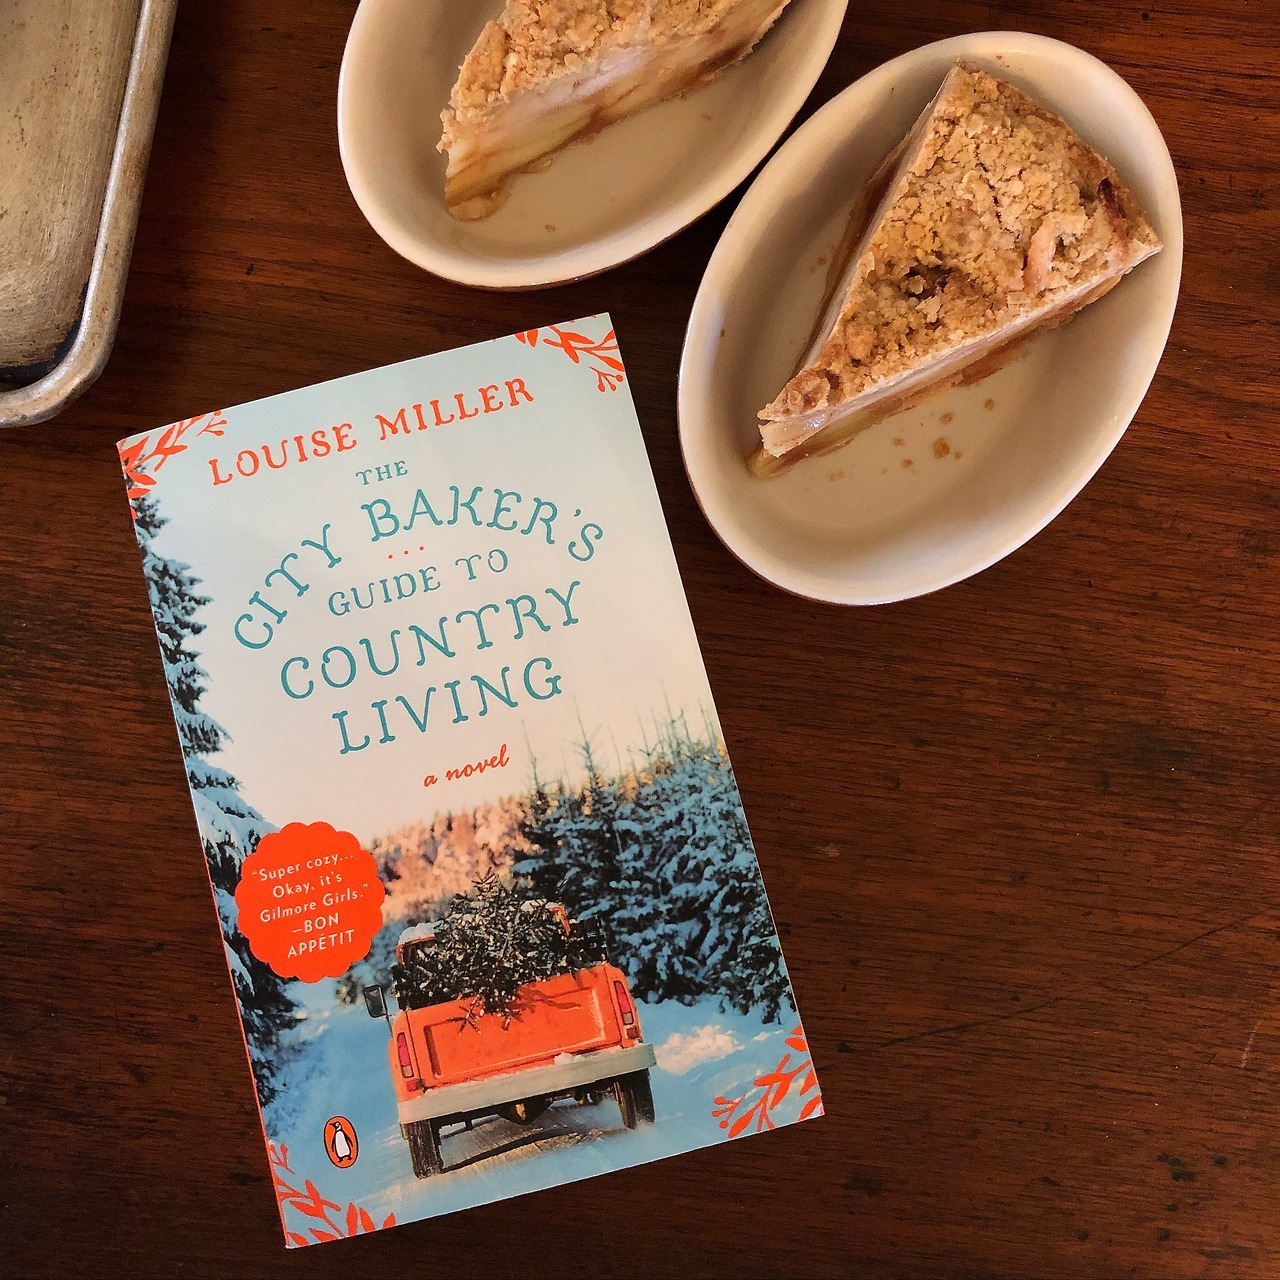 The City Baker's Guide to Country Living by Miller, Louise